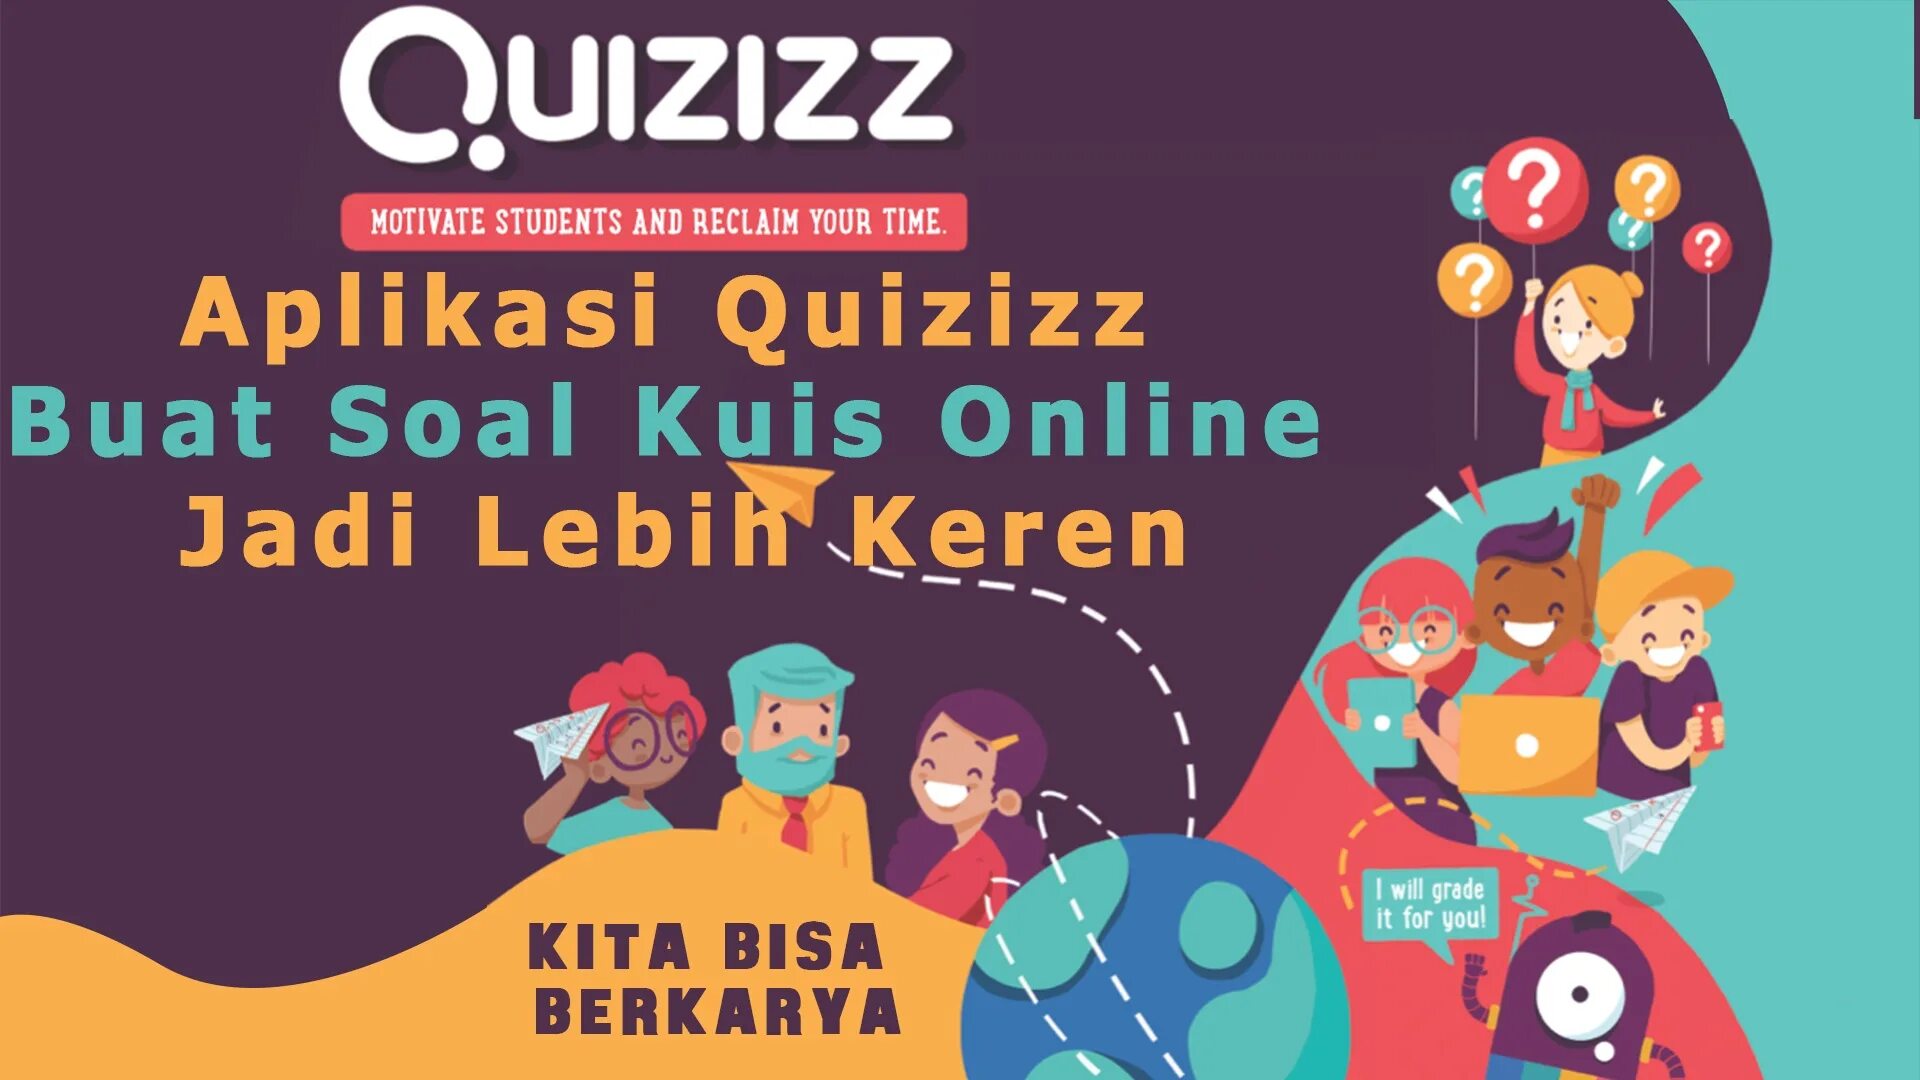 Quizizz com quiz. Quizizz. Quizizz time. Quizizz фото. Quizizz for students.